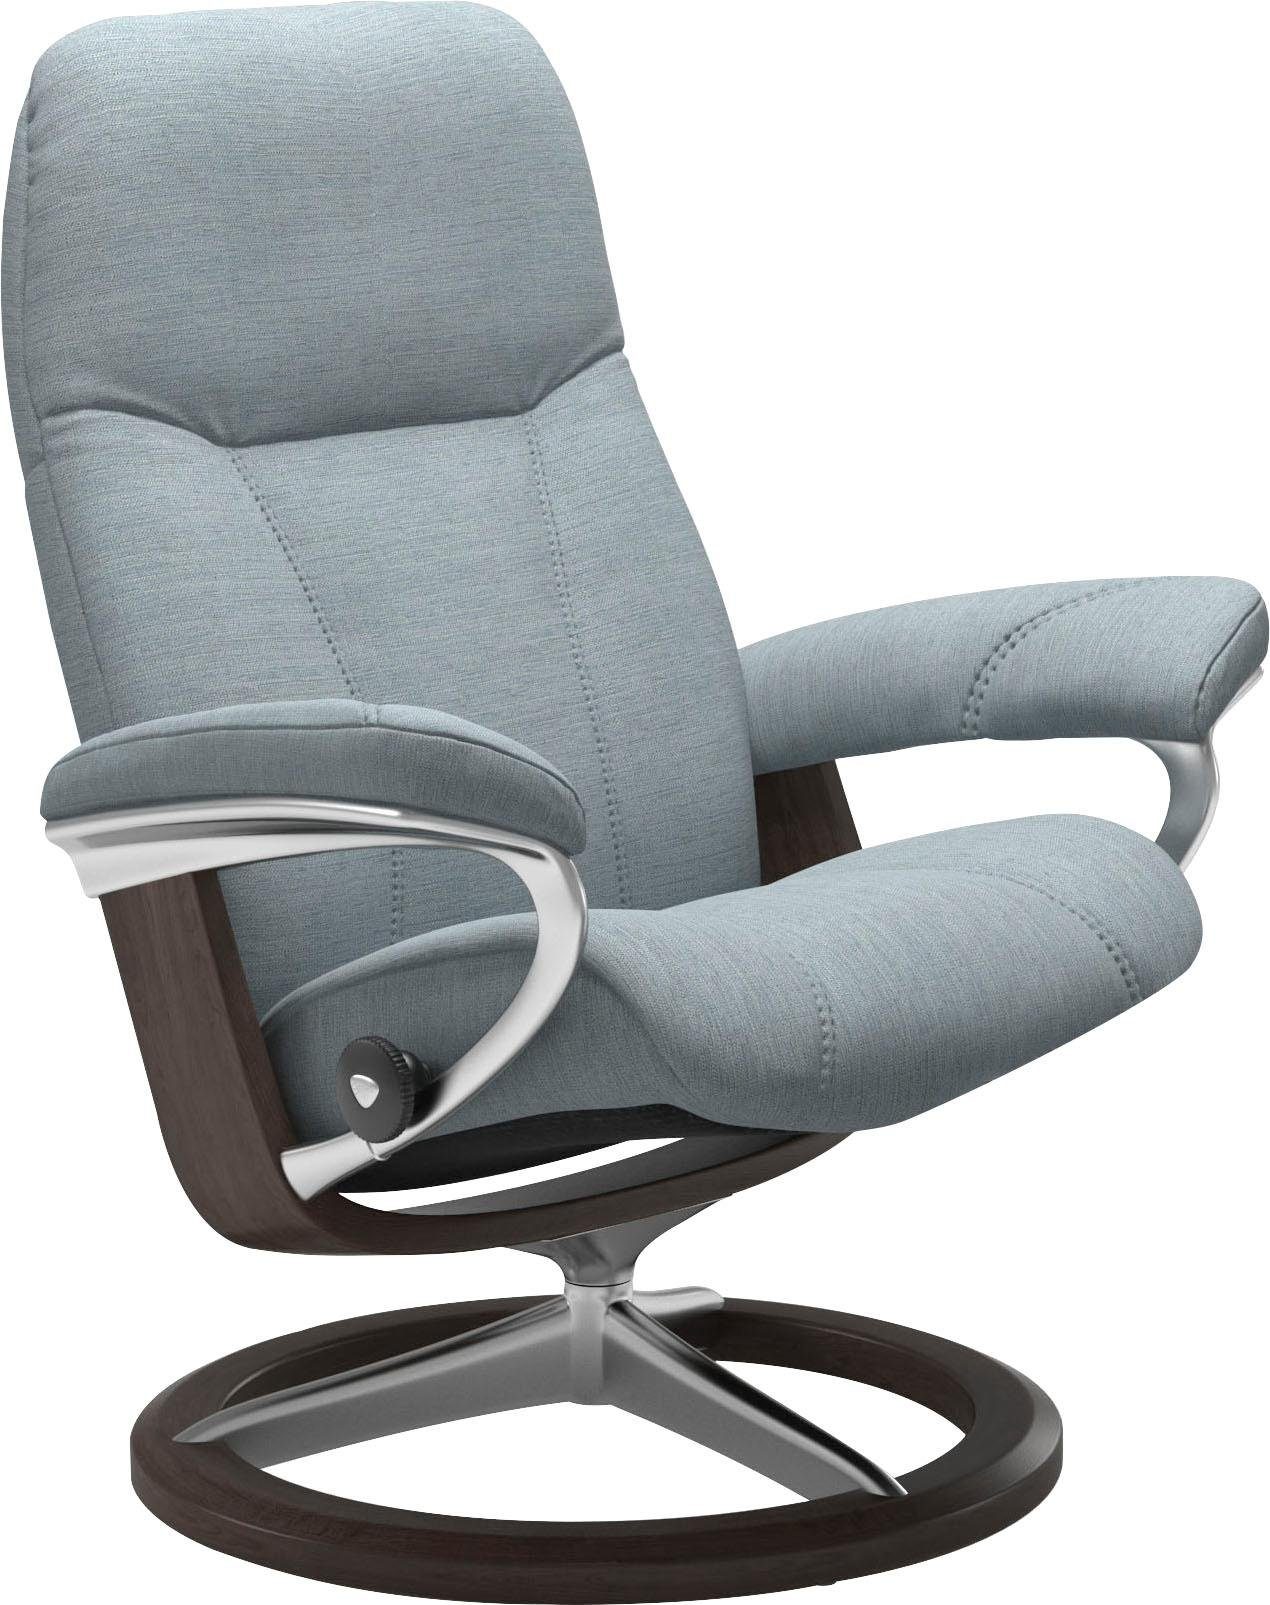 Stressless® Relaxsessel Consul, mit Signature Größe Base, S, Wenge Gestell